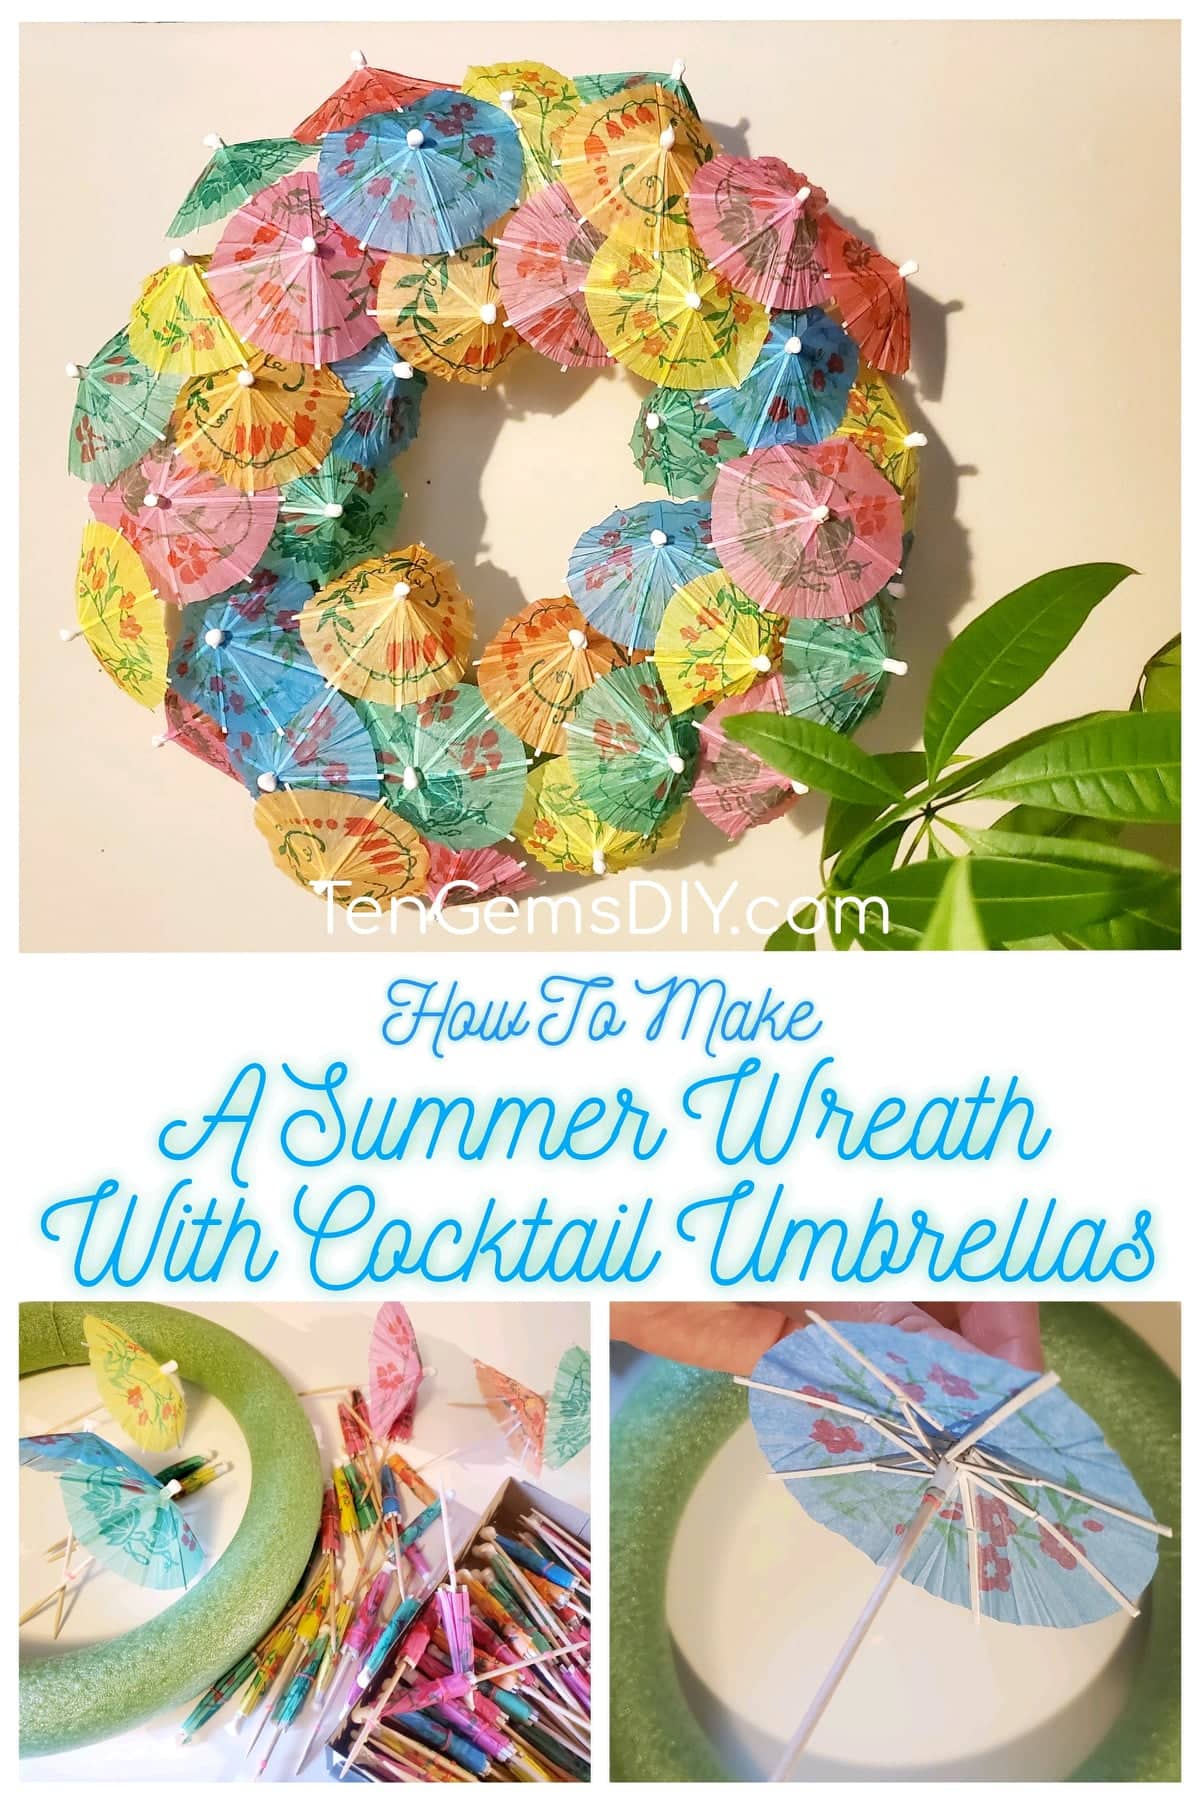 How to Make a Summer Wreath with Cocktail Umbrellas